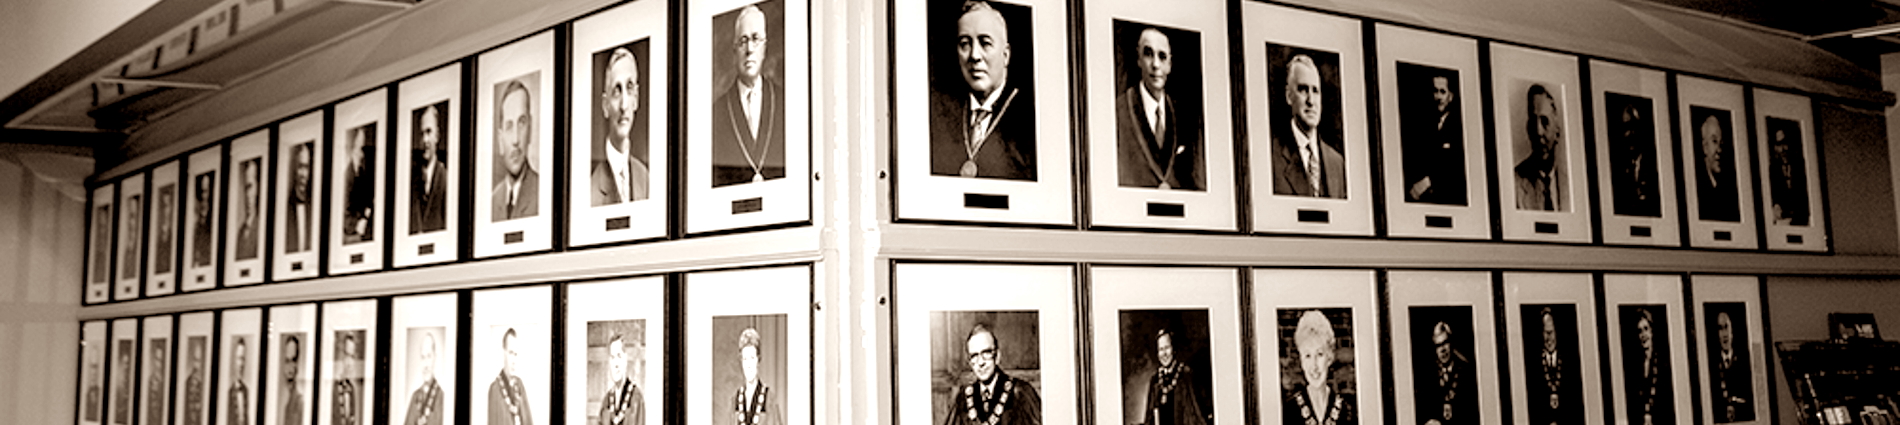 View of Past Belleville Mayors